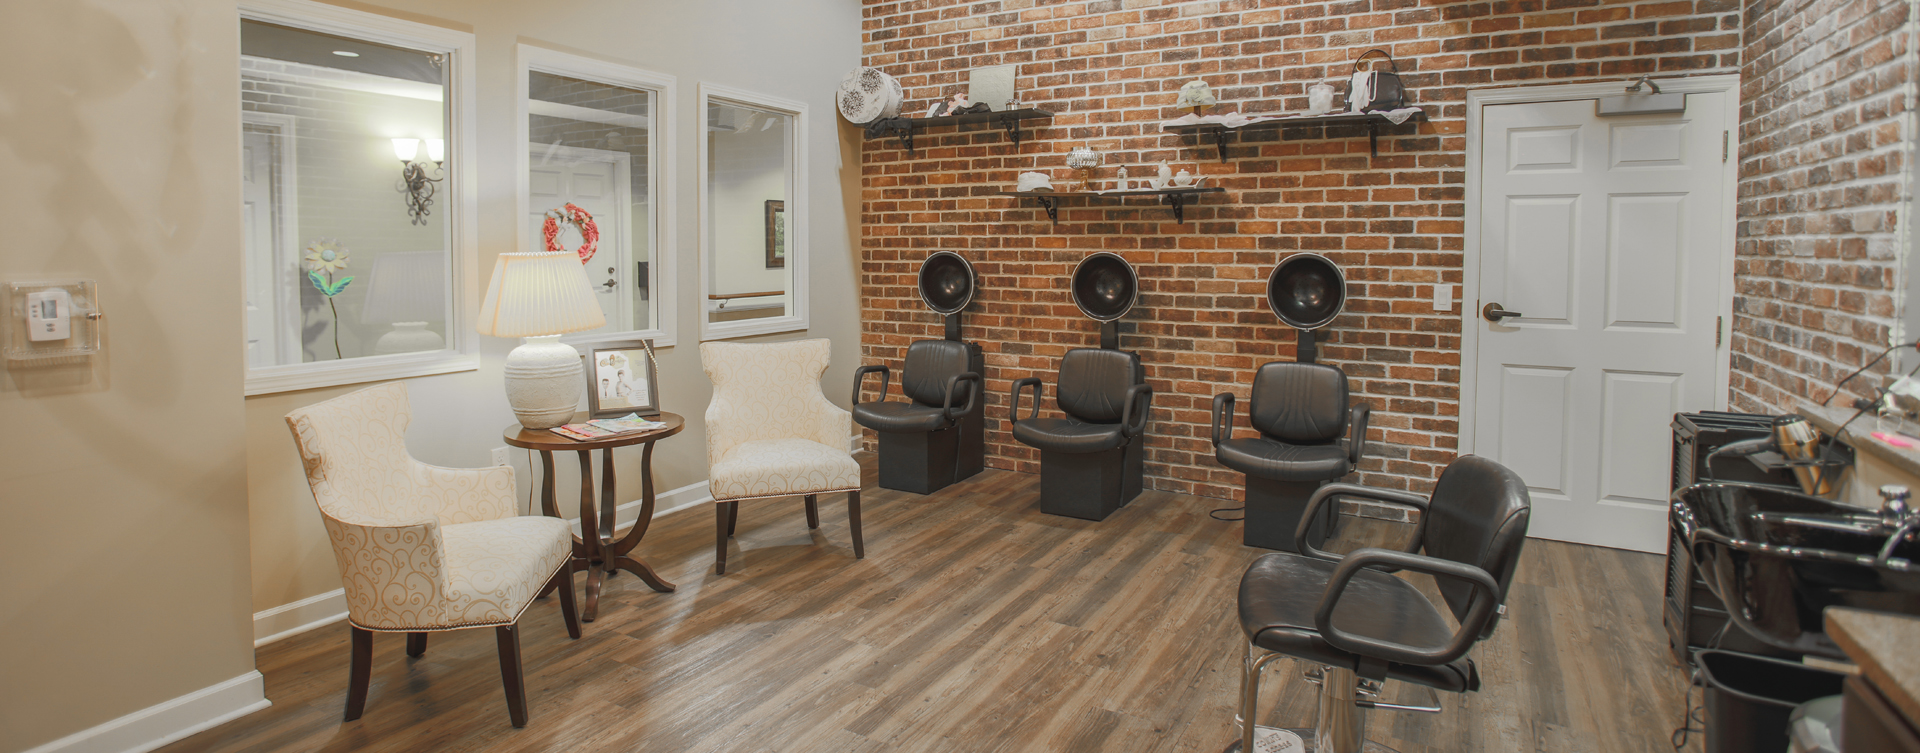 Strut on in and find out what the buzz is all about in the salon at Bickford of Carmel